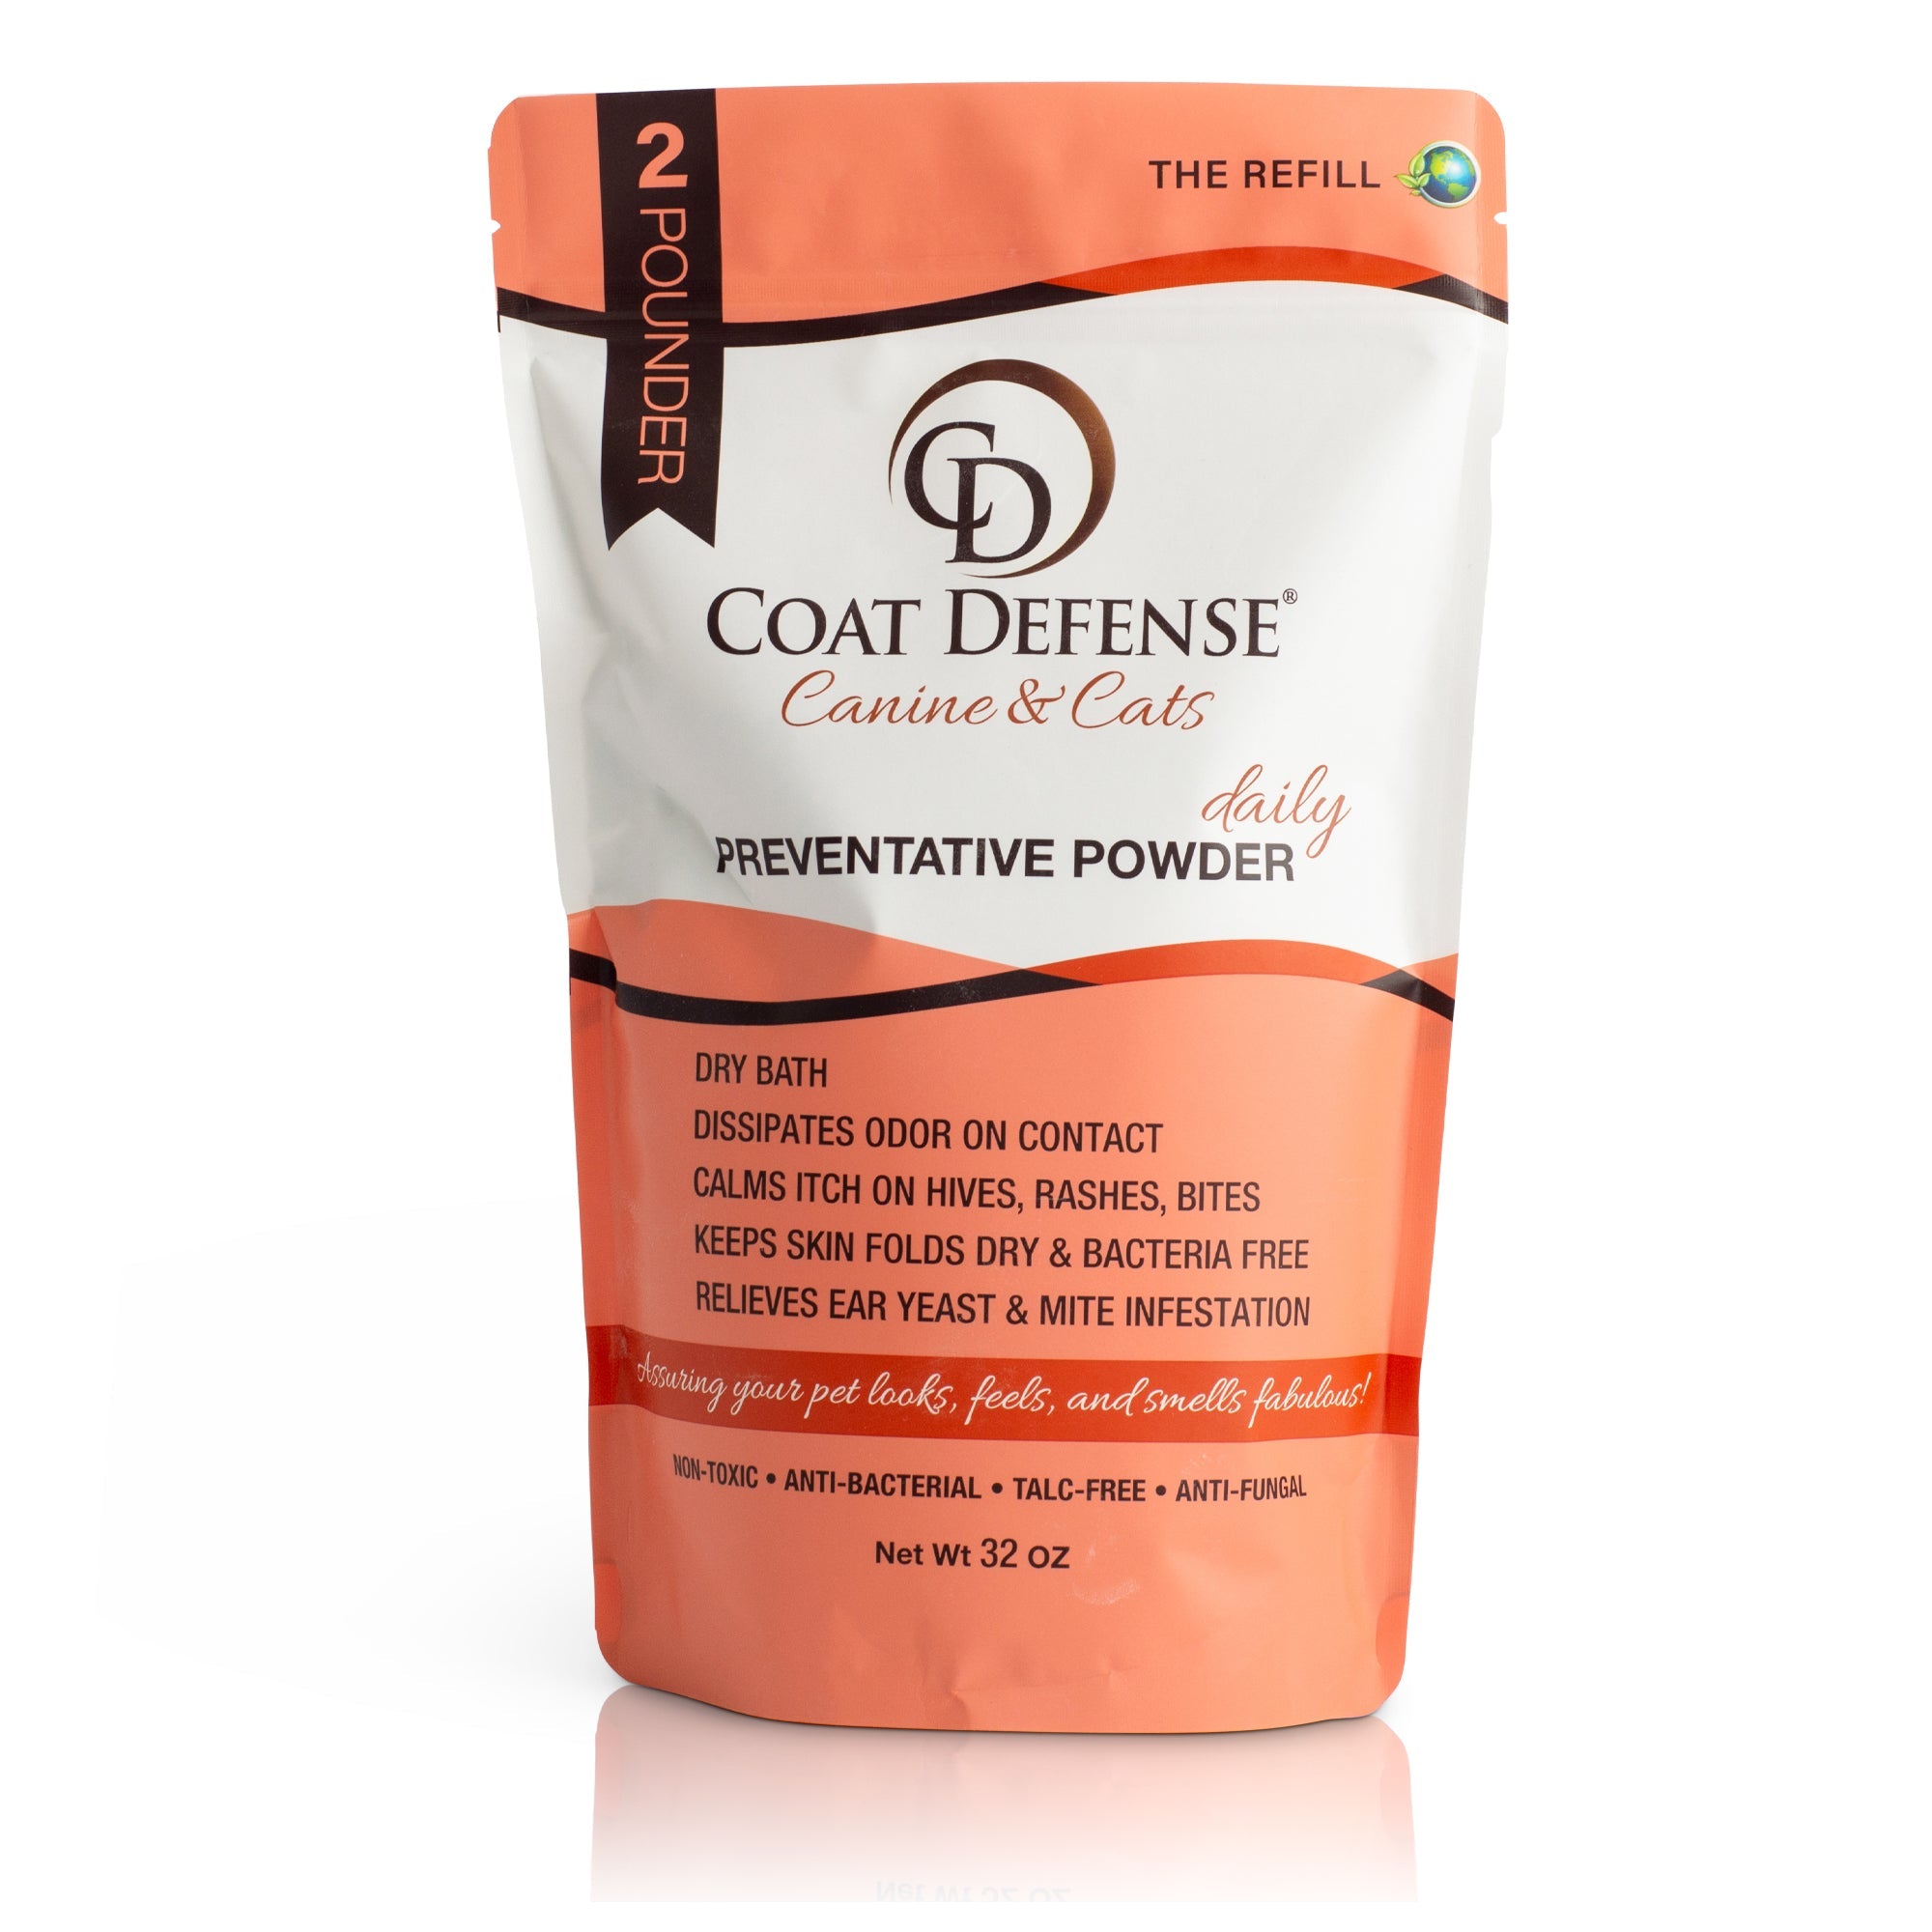 Daily Preventative Powder for Dogs  Stink & Itch Relief Dry Shampoo - Coat  Defense